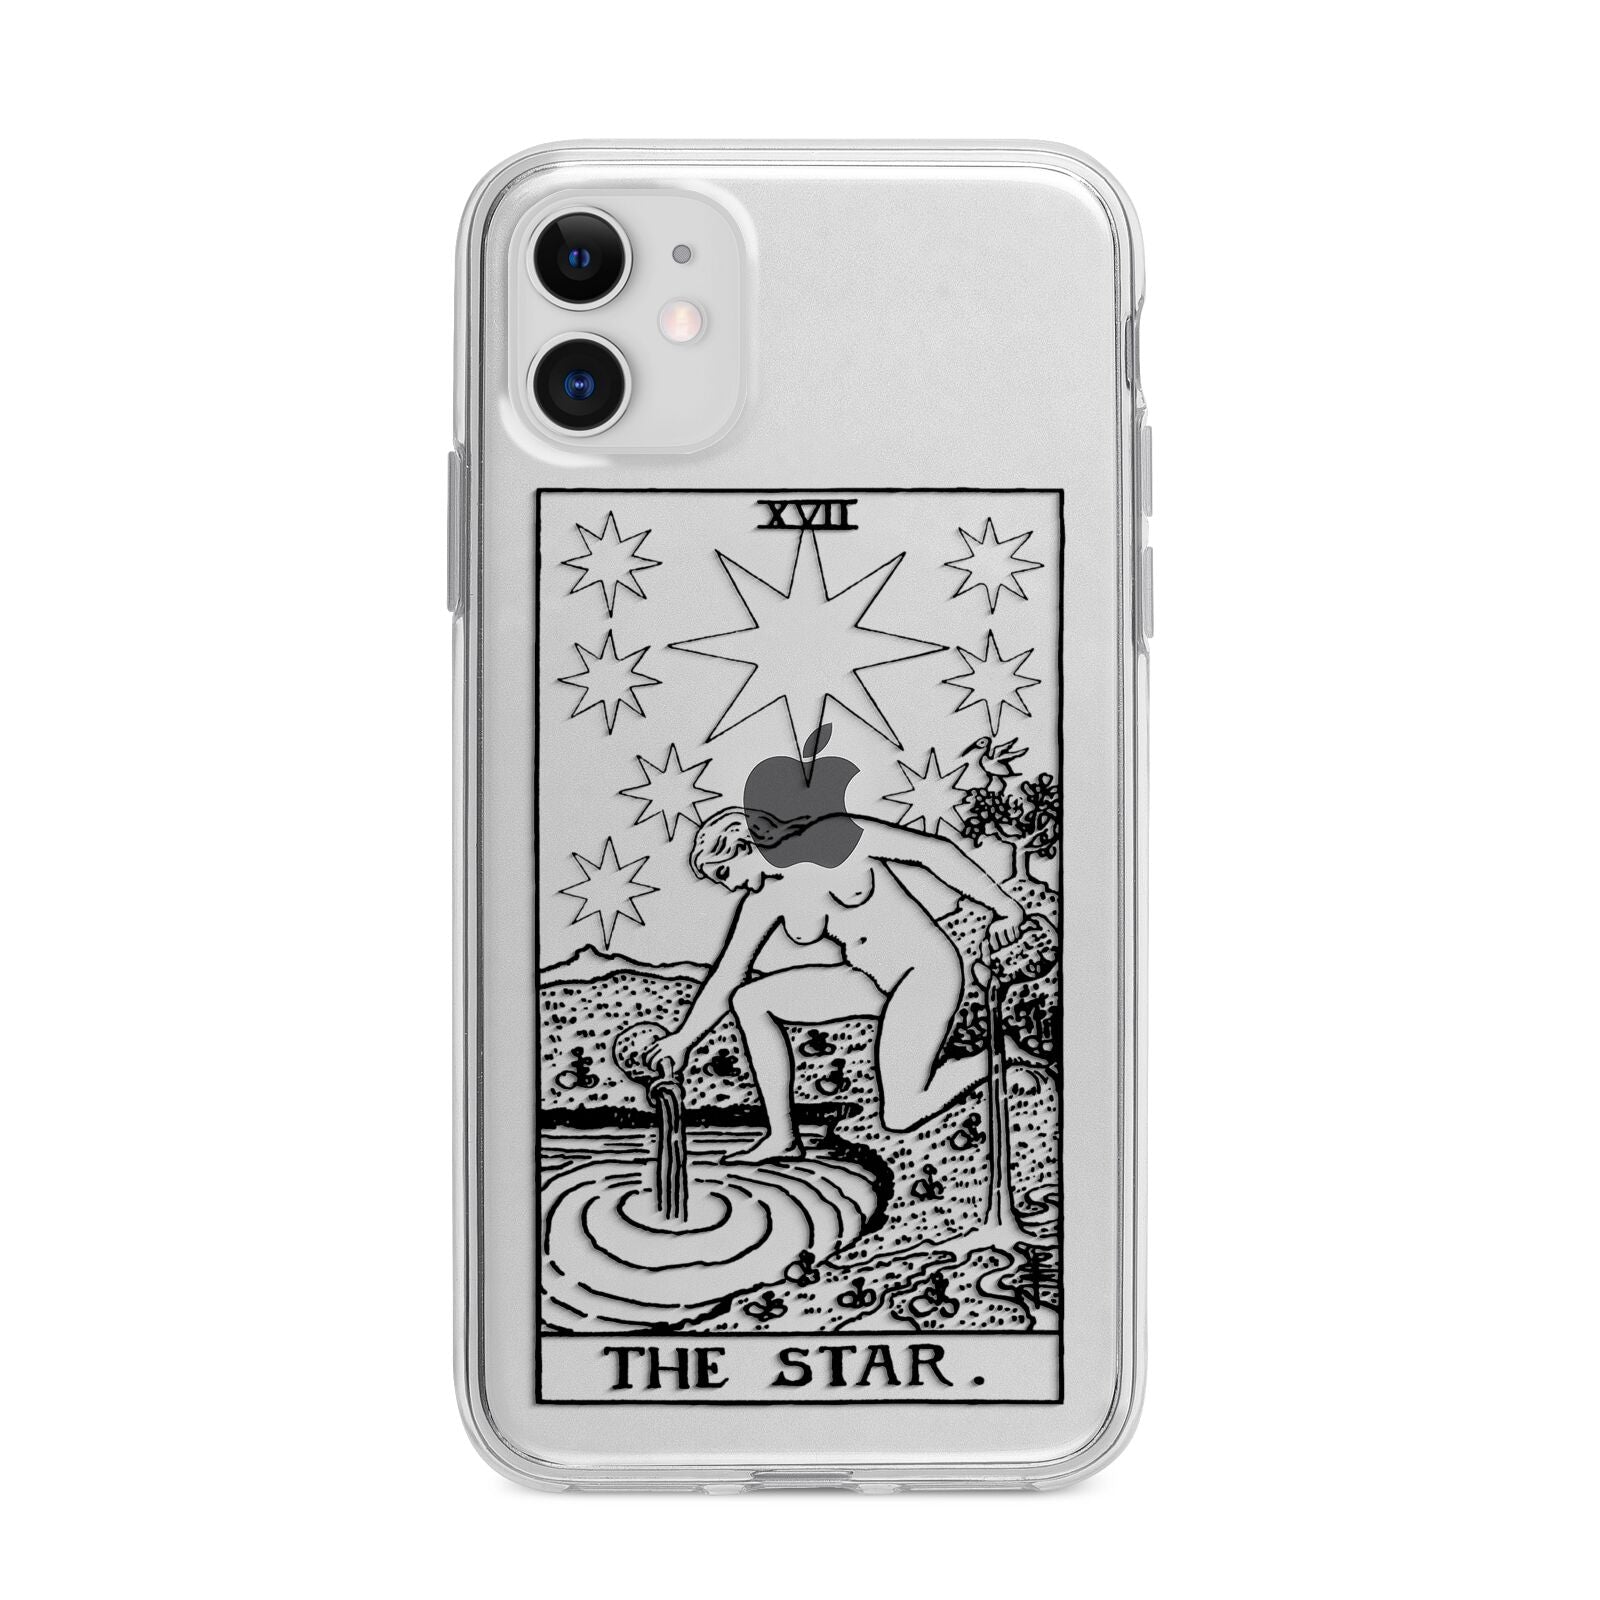 The Star Monochrome Tarot Card Apple iPhone 11 in White with Bumper Case